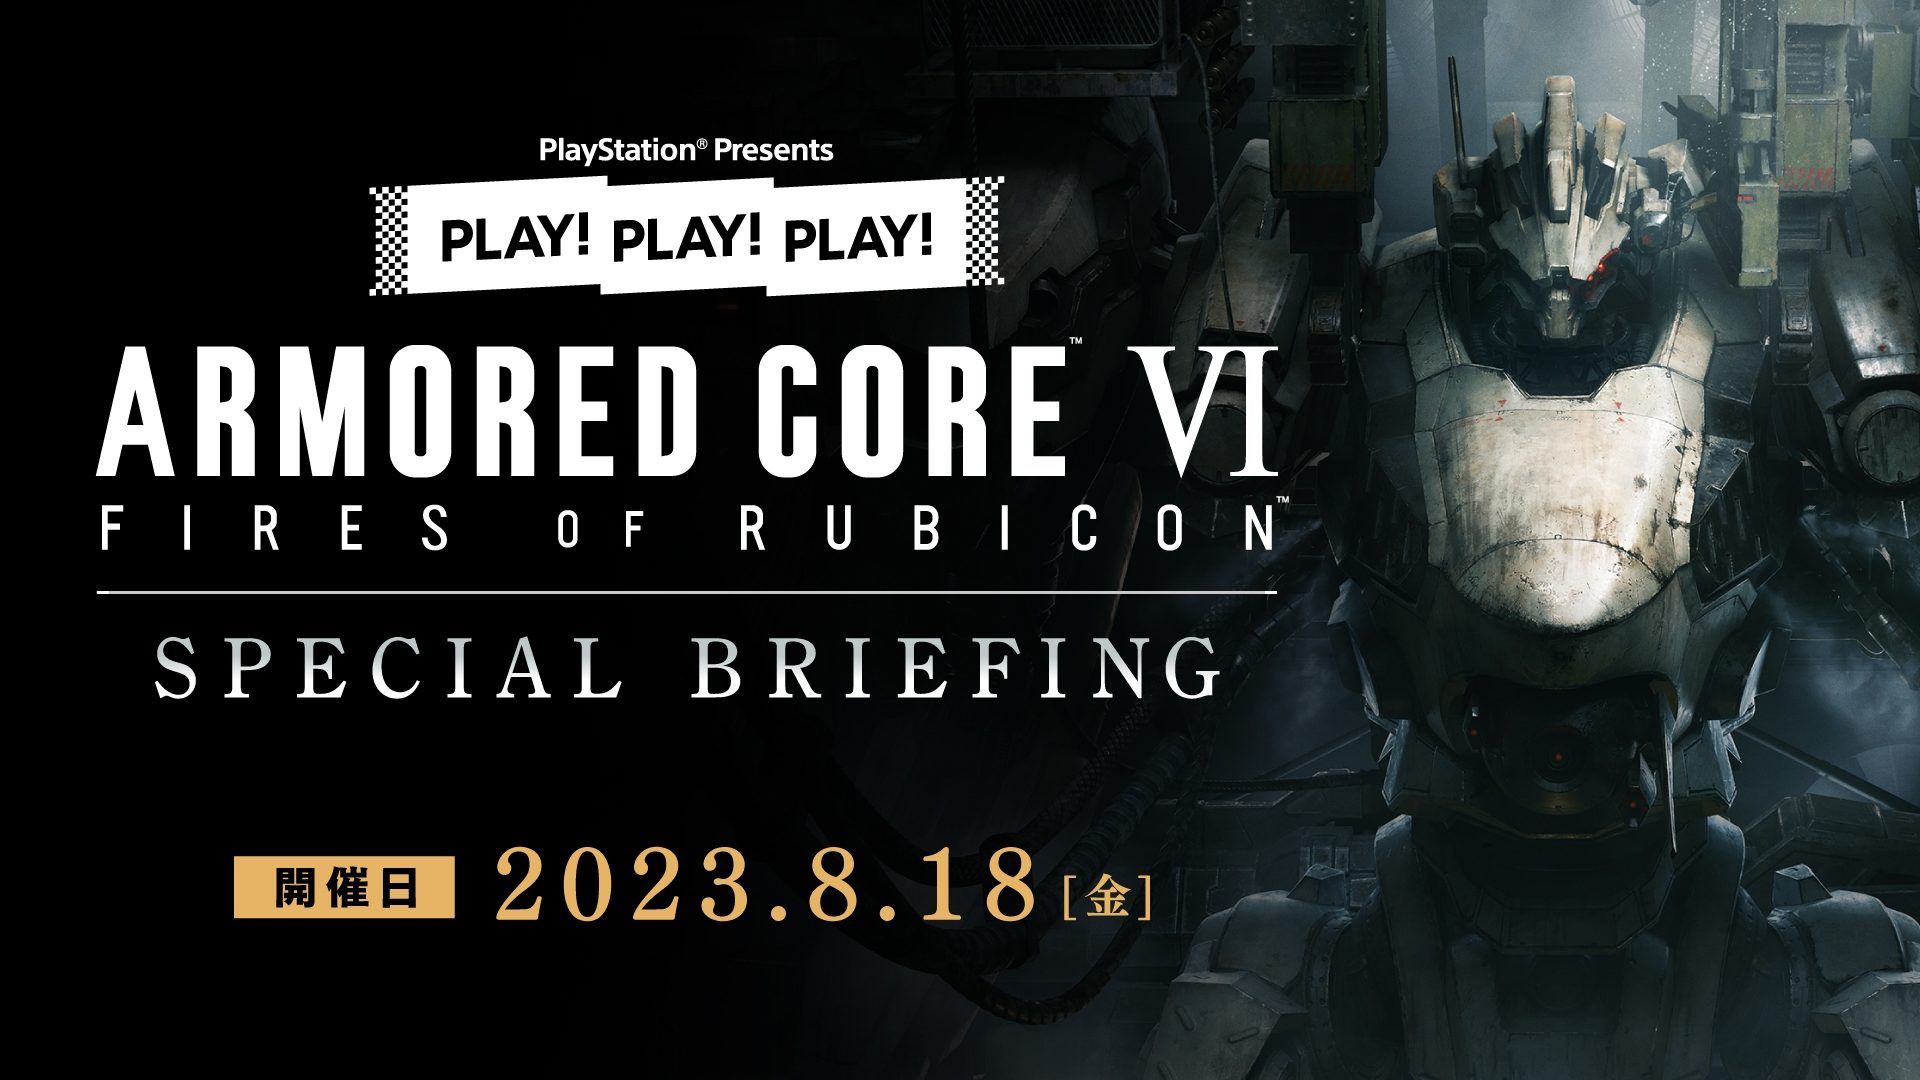 PLAY! PLAY! PLAY!『ARMORED CORE VI FIRES OF RUBICON』SPECIAL